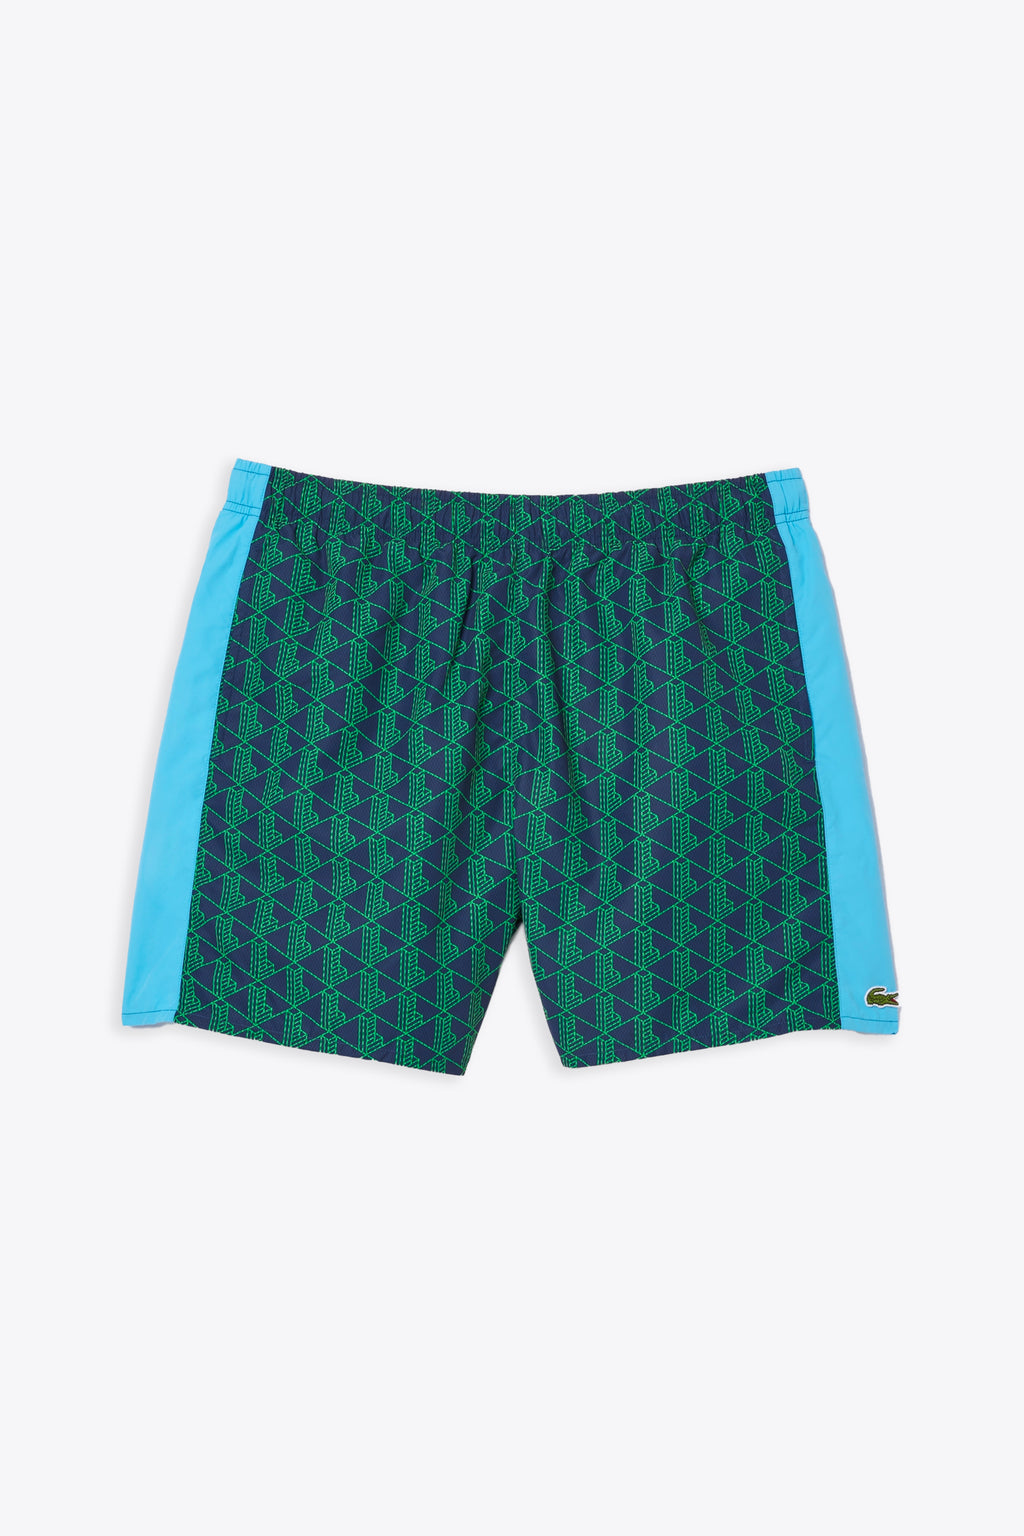 alt-image__Navy-blue-swim-shorts-with-geometric-pattern-and-side-bands